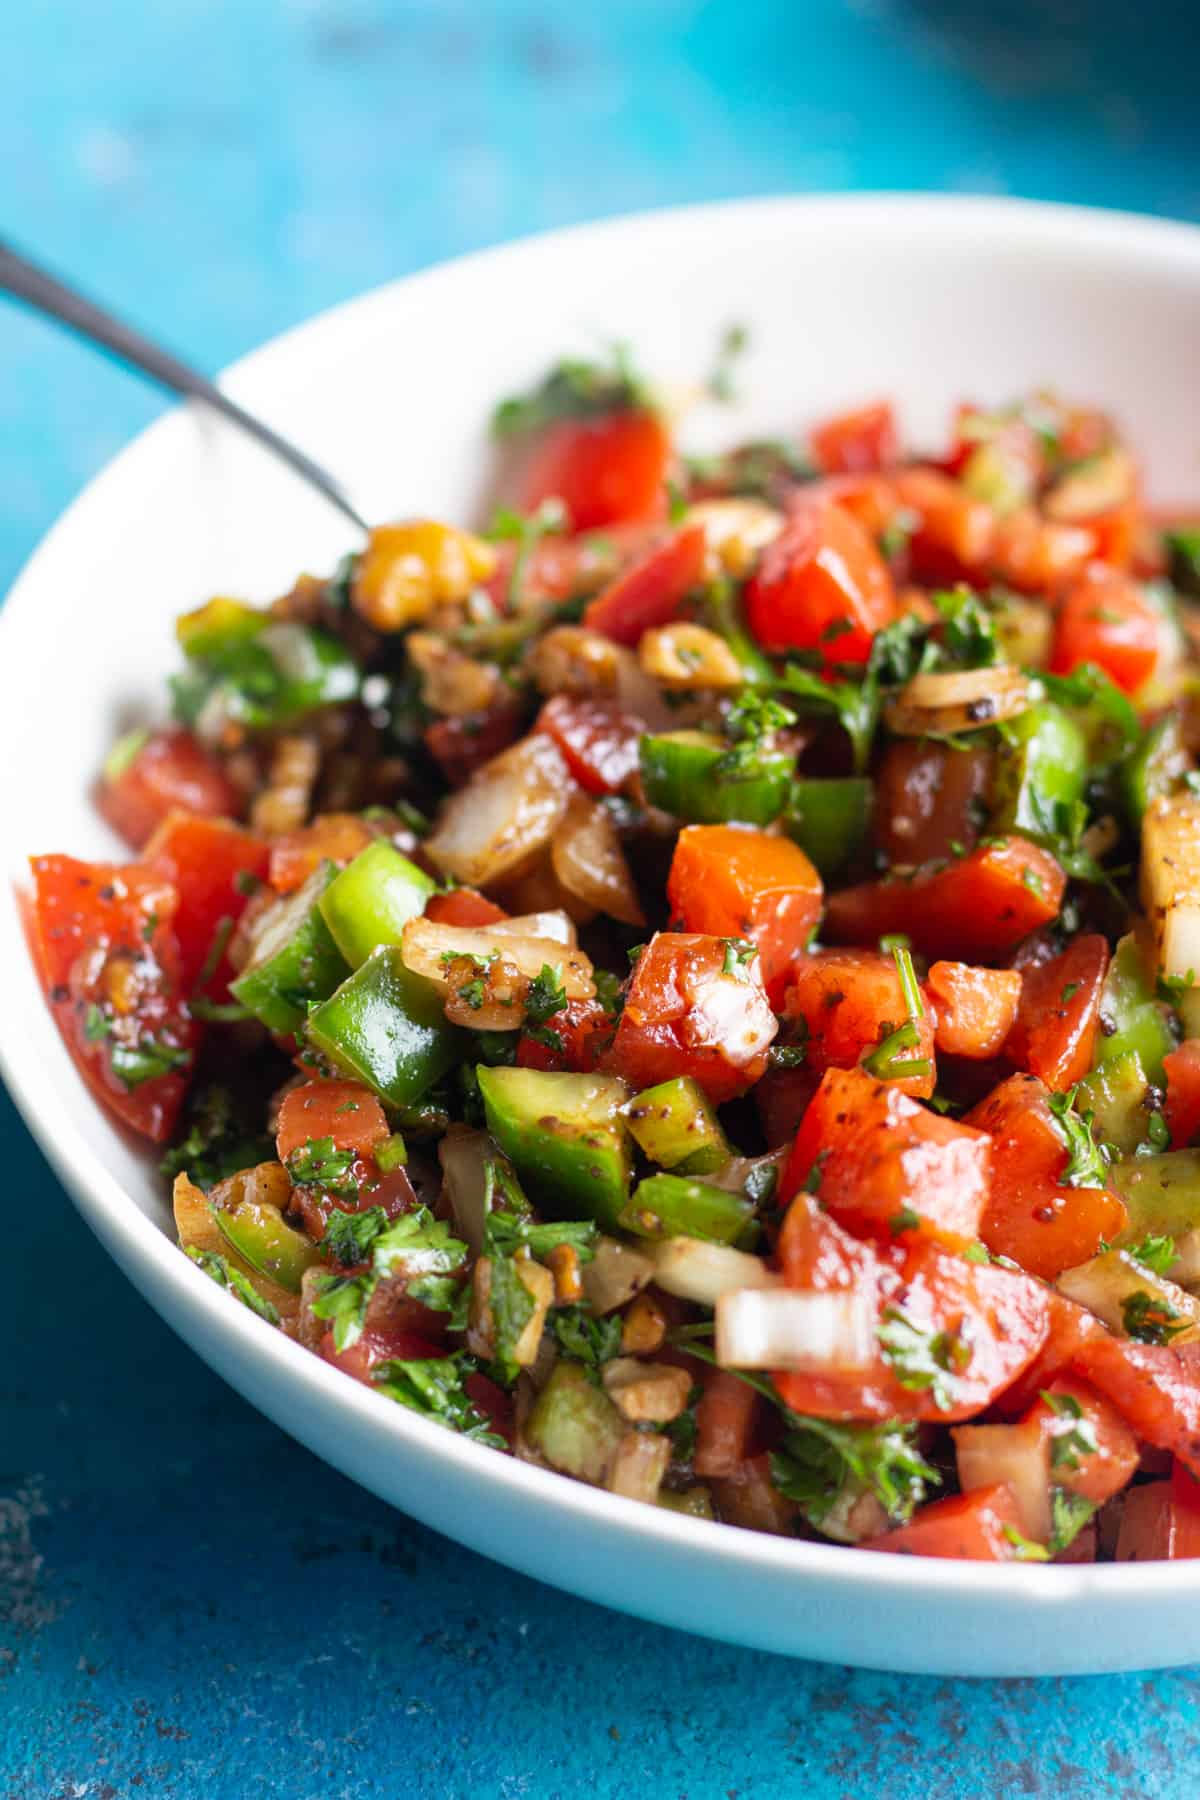 Turkish tomato salad made with fresh, plump tomatoes, cucumbers and crunchy walnuts is absolutely delicious. Flavored with pomegranate molasses and ready in 15 minutes, this is the perfect side dish.
